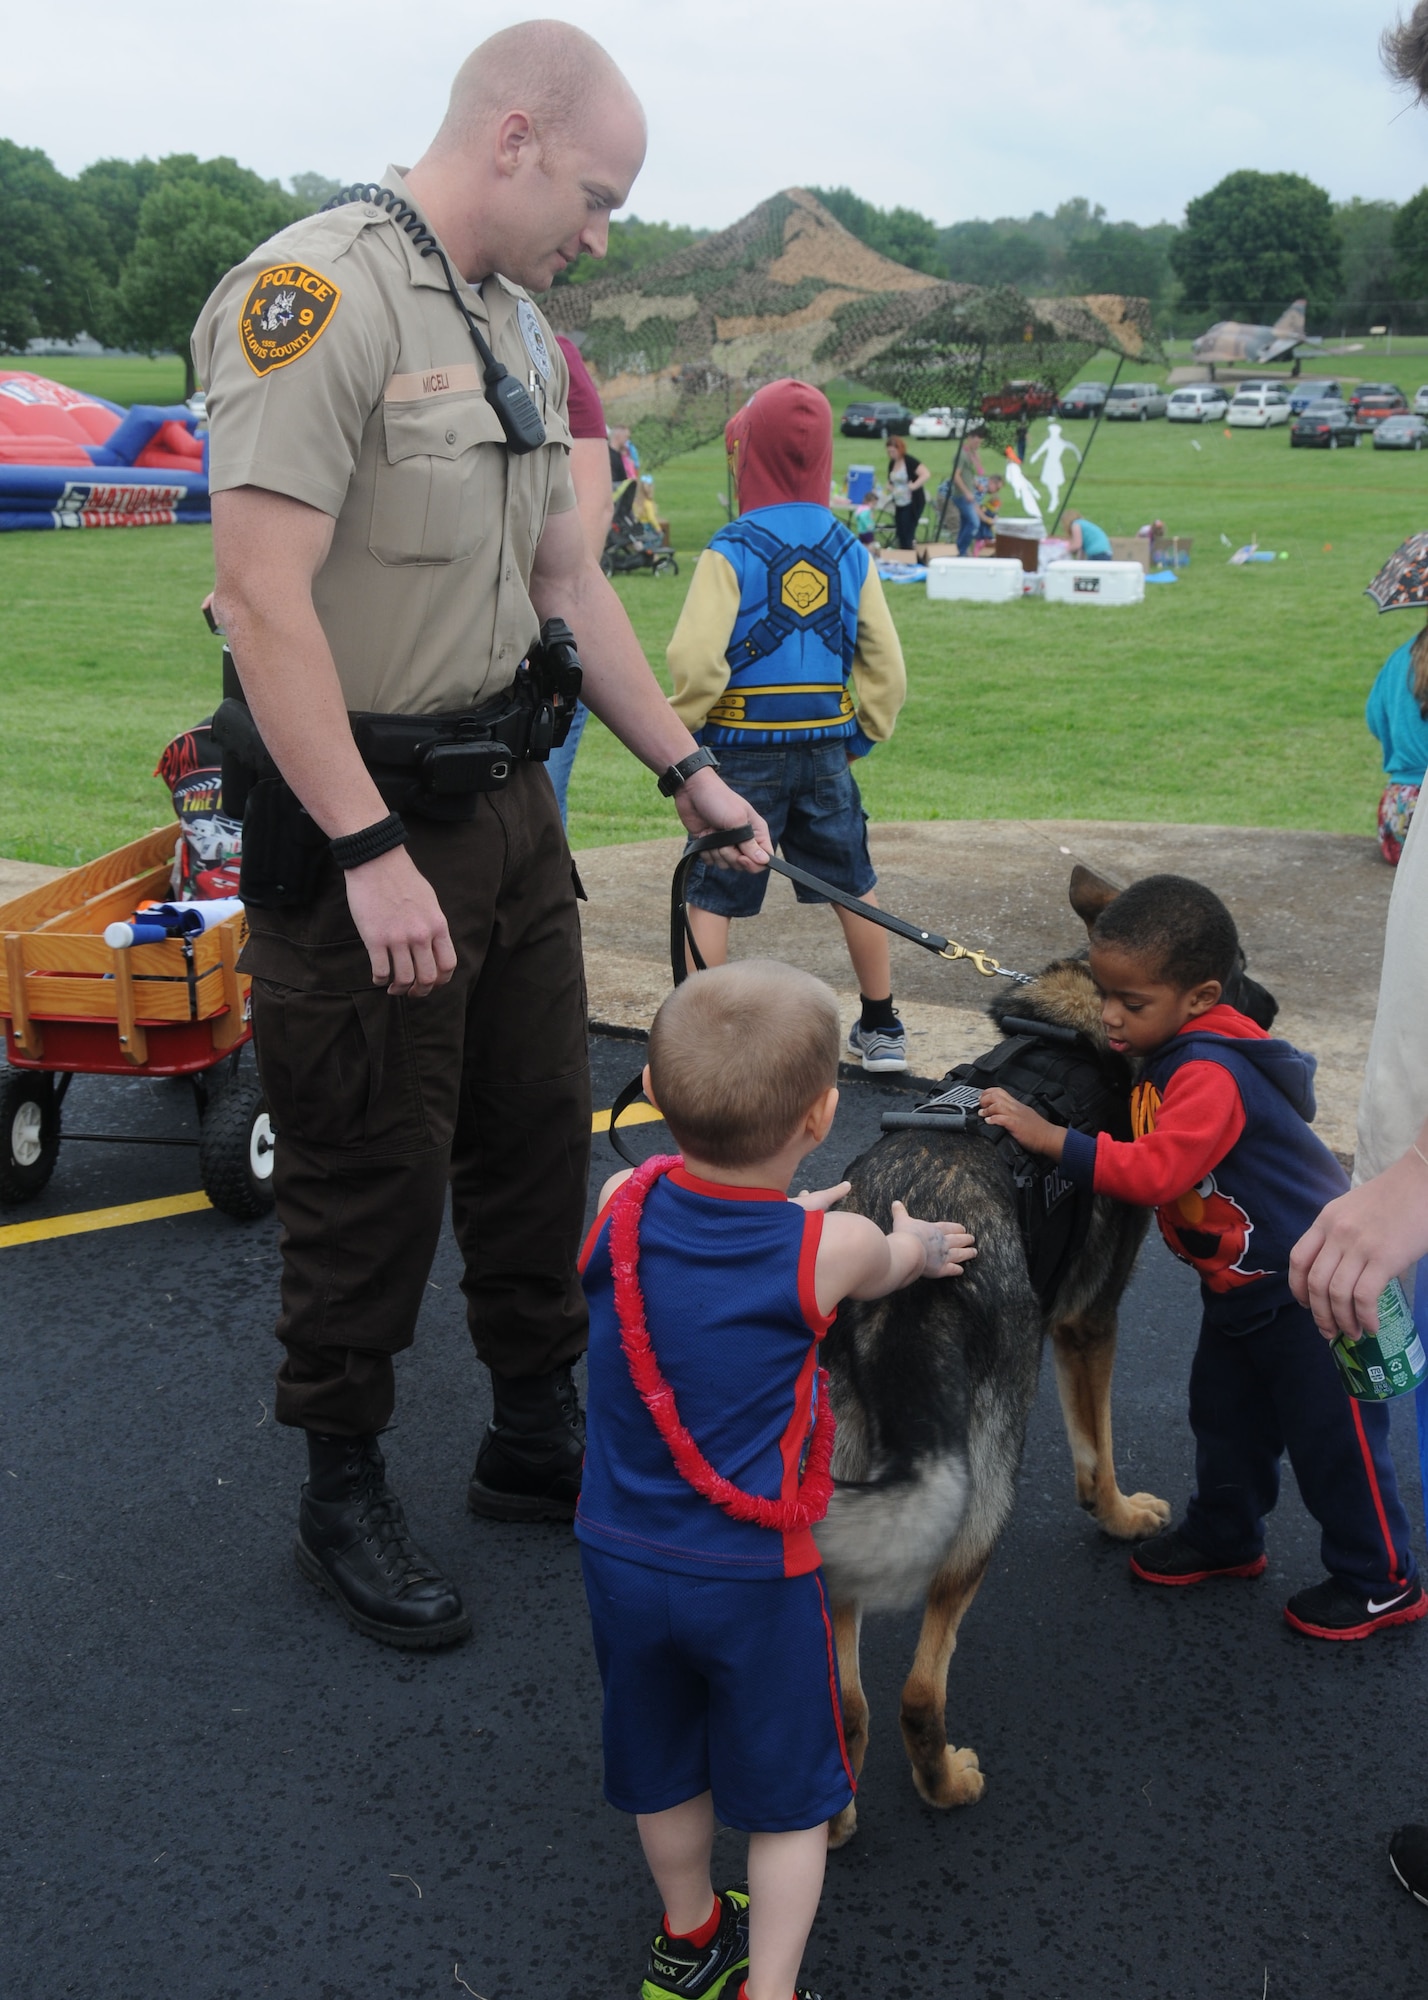 An officer with the St. Louis County Police Department shows off a member of its K-9 unit to children of the 157th Air Operations Group during the Family Day picnic at Jefferson Barracks, Missouri on Sept. 6, 2014. The St. Louis County Police Department has been a regular partner in the Family Day festivities at Jefferson Barracks. (U.S. Air National Guard photo by Senior Airman Nathan Dampf)